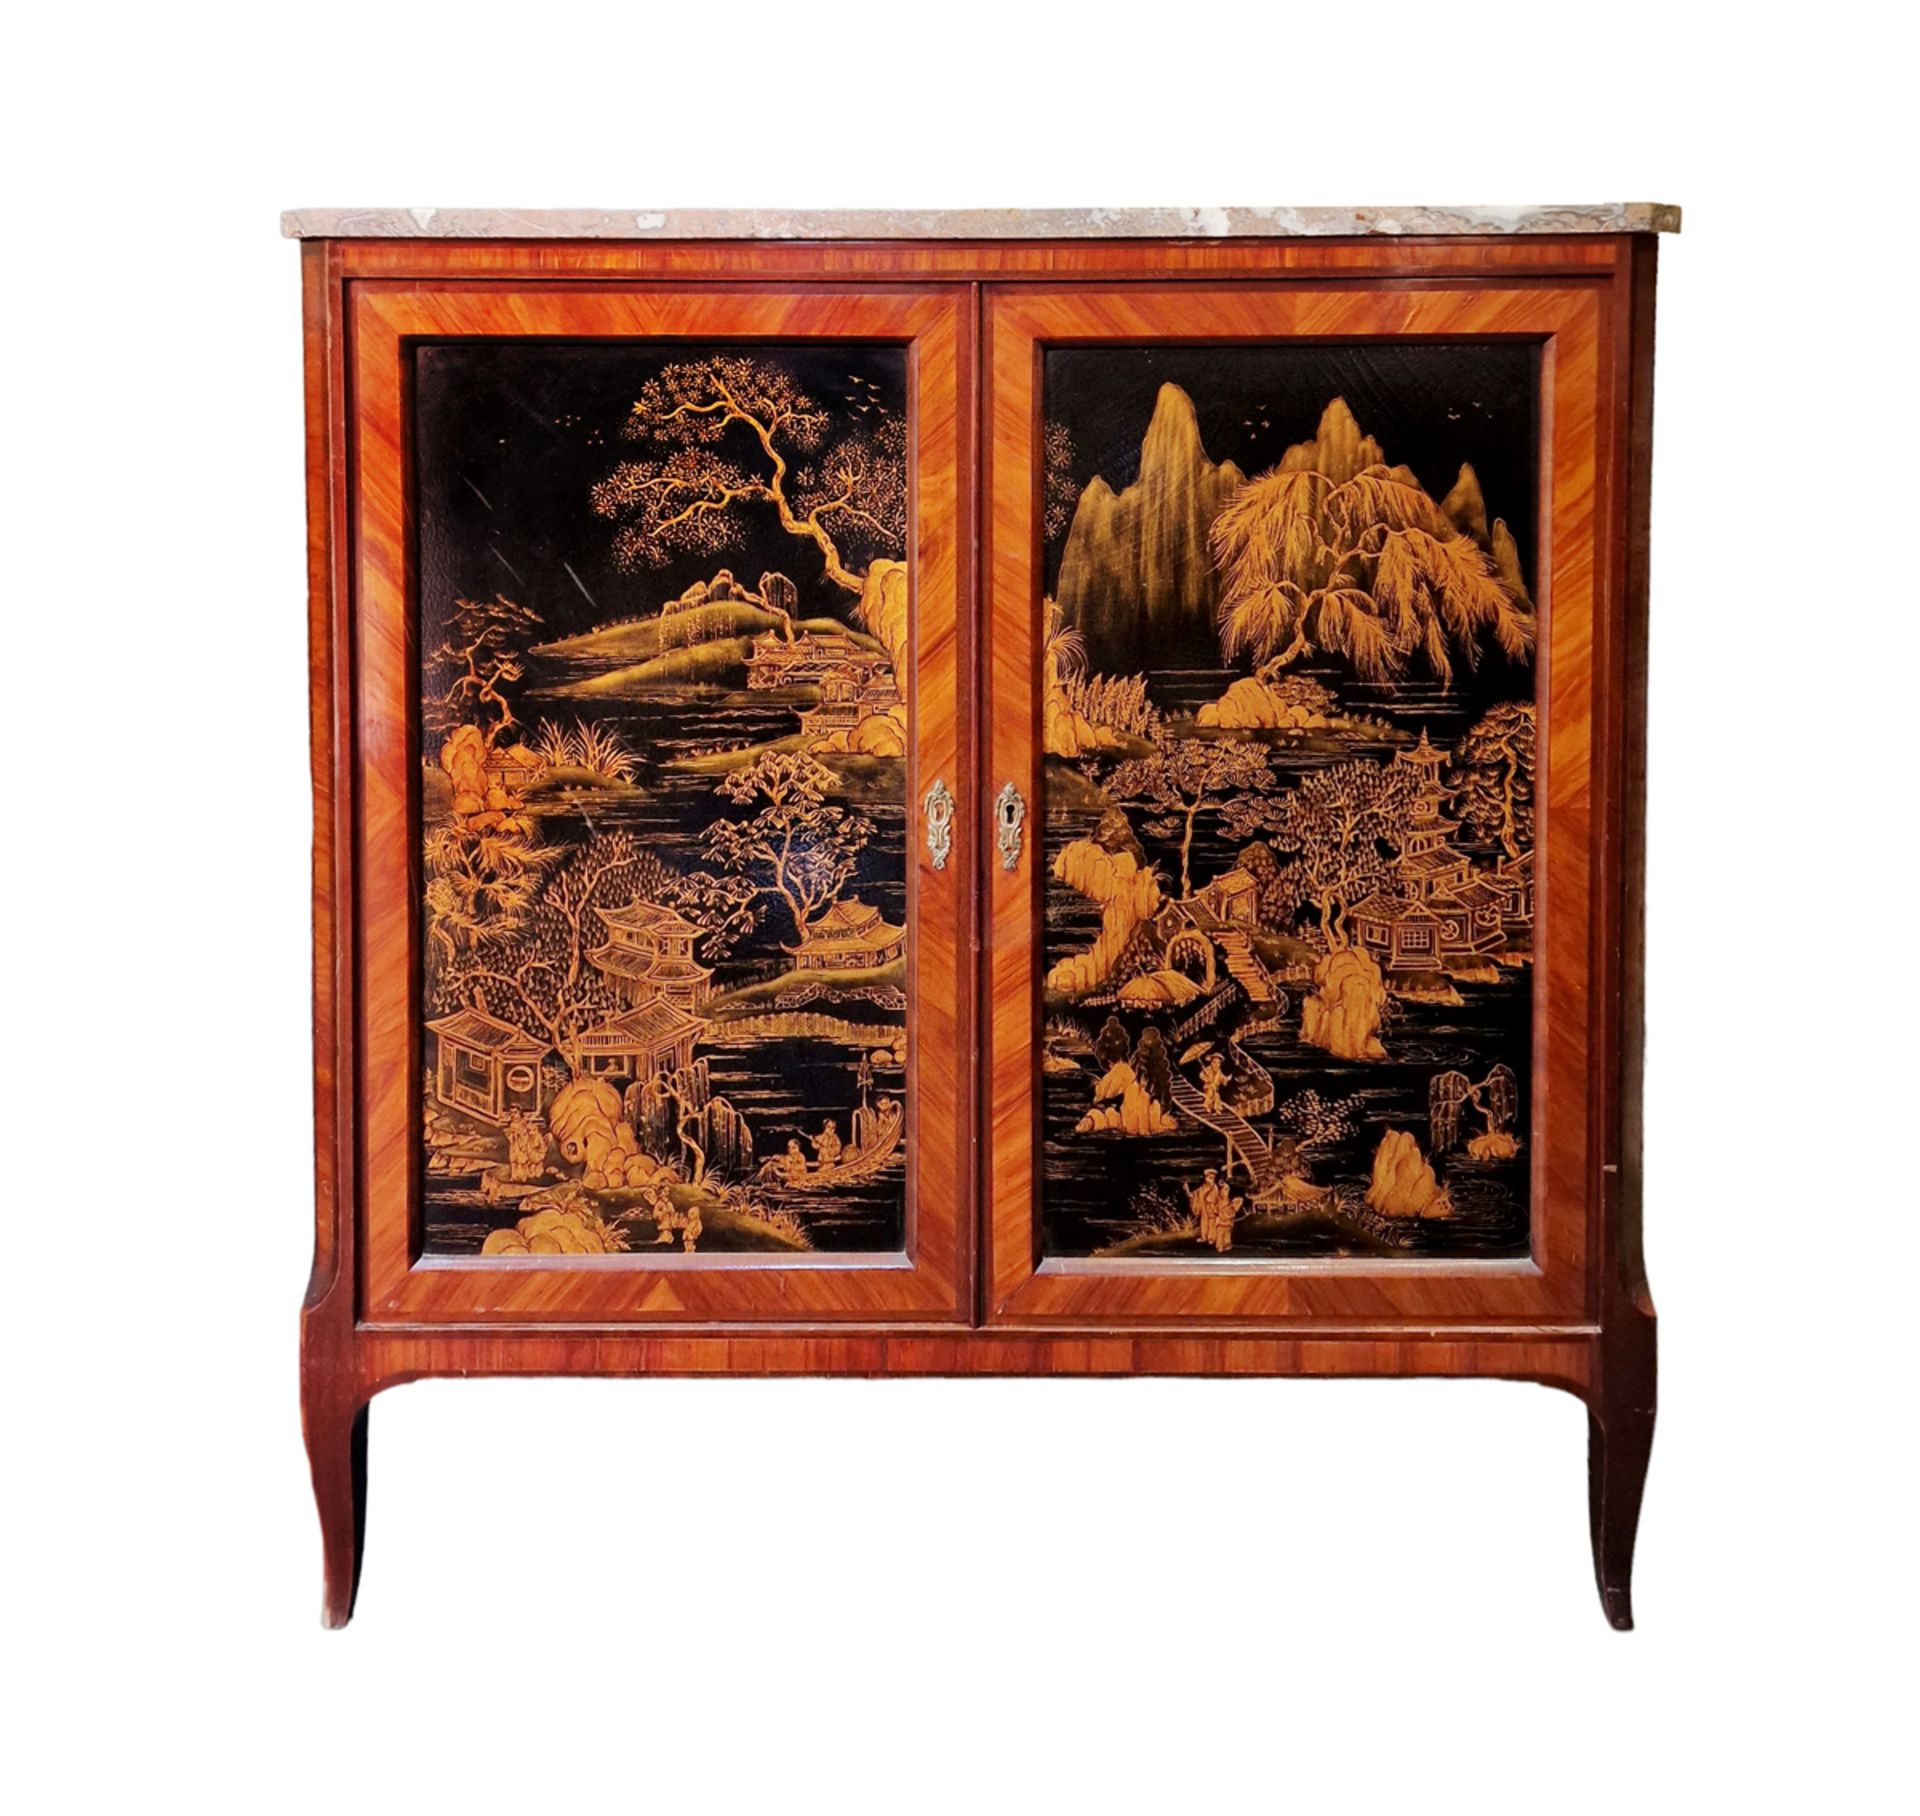 BUFFET AUX CHINOISERIES, VERS 1900